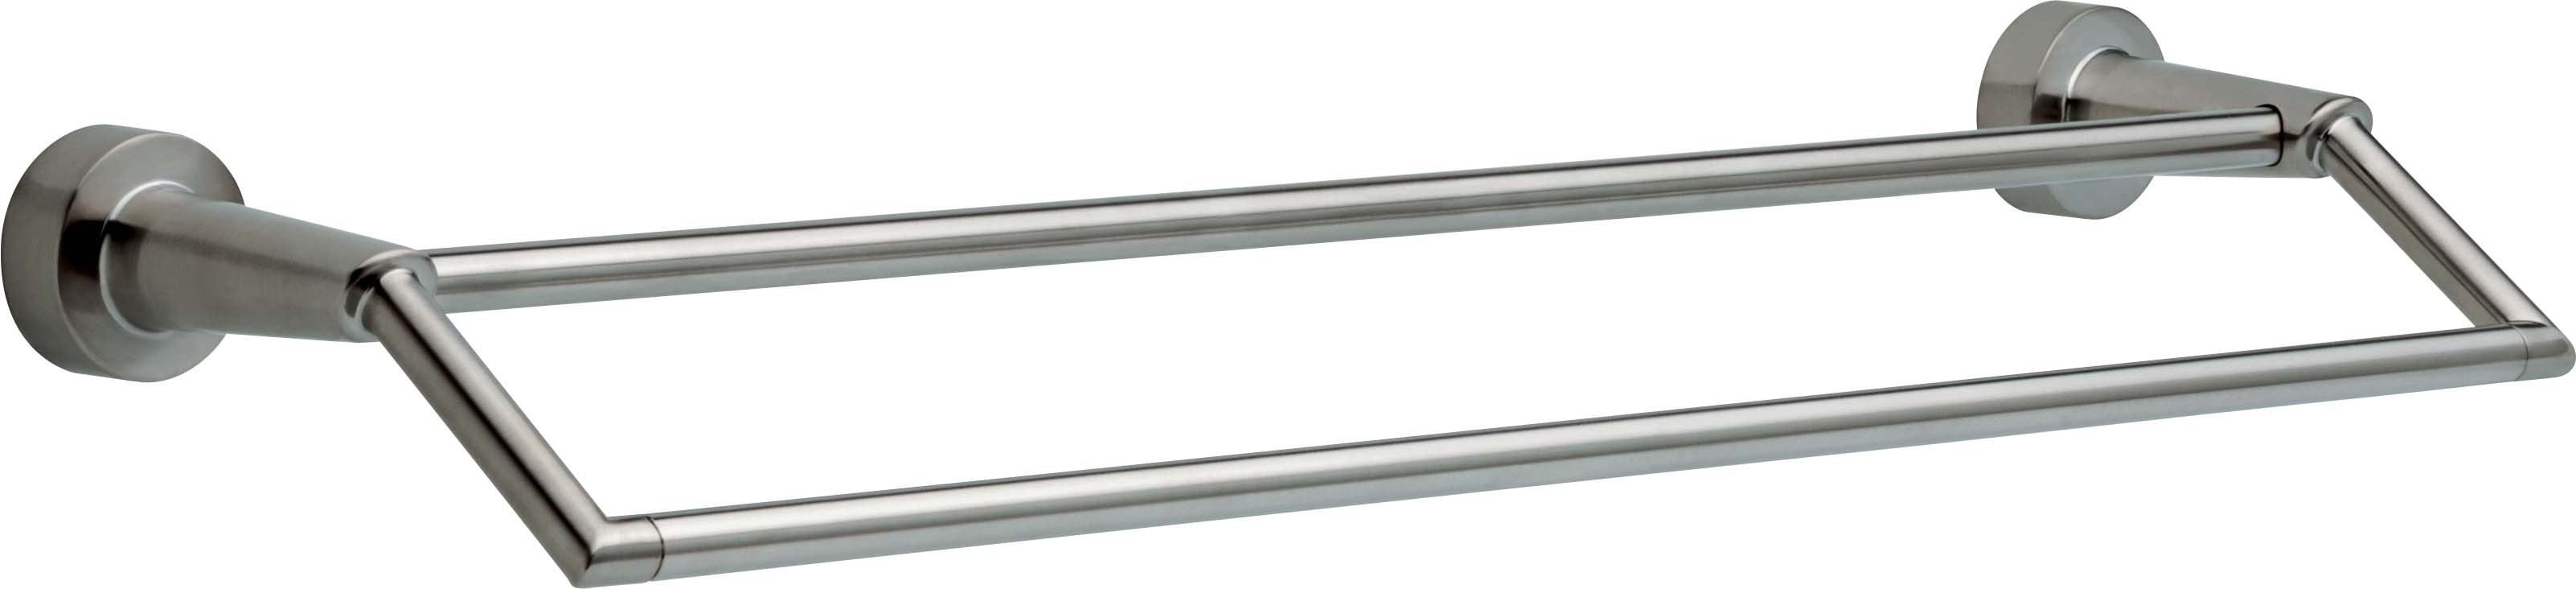 Delta-Delex-Brizo | 77125-SS | DELTA 77125-SS DOUBLE TOWEL BAR SS STAINLESS STEEL